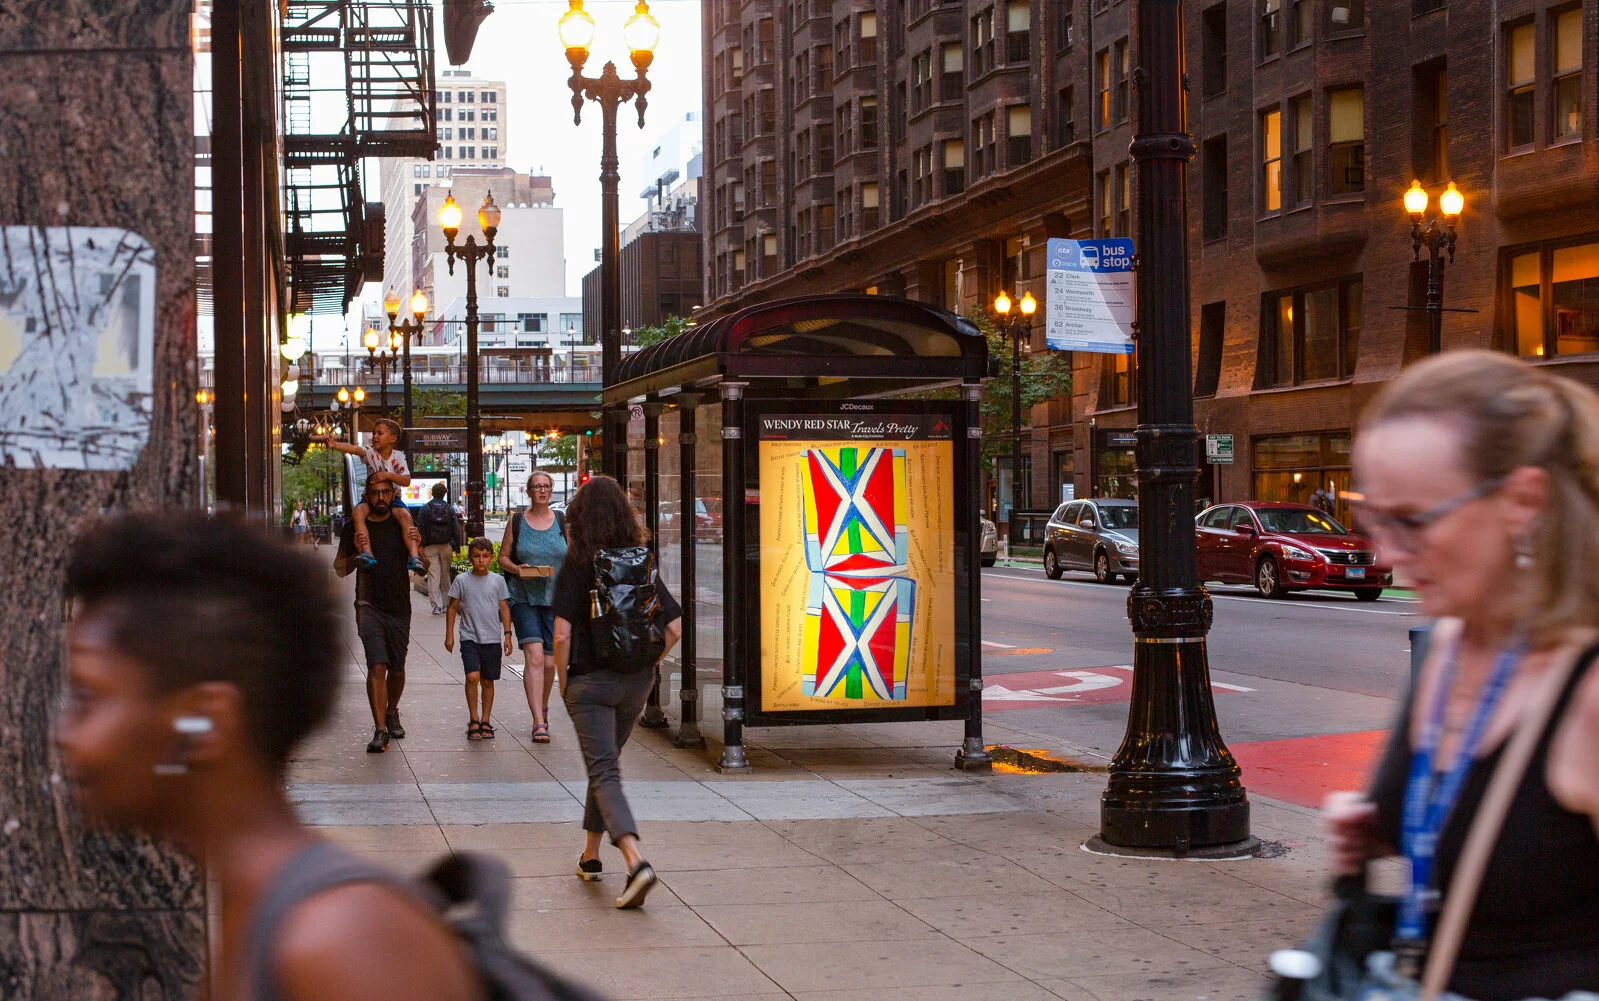 Wendy Red Star, <i>Shows Going</i>, 2022. Courtesy the artist. Photo: David Sampson, Courtesy of Public Art Fund, NY. Artwork part of <i>Wendy Red Star: Travels Pretty</i>, presented in Chicago by Public Art Fund on 300 JCDecaux bus shelters across New York City, Boston, and Chicago, on view August 10—November 20, 2022.
 2022/09/PAF-Aug22-WendyRedStar-v2-3.jpg 